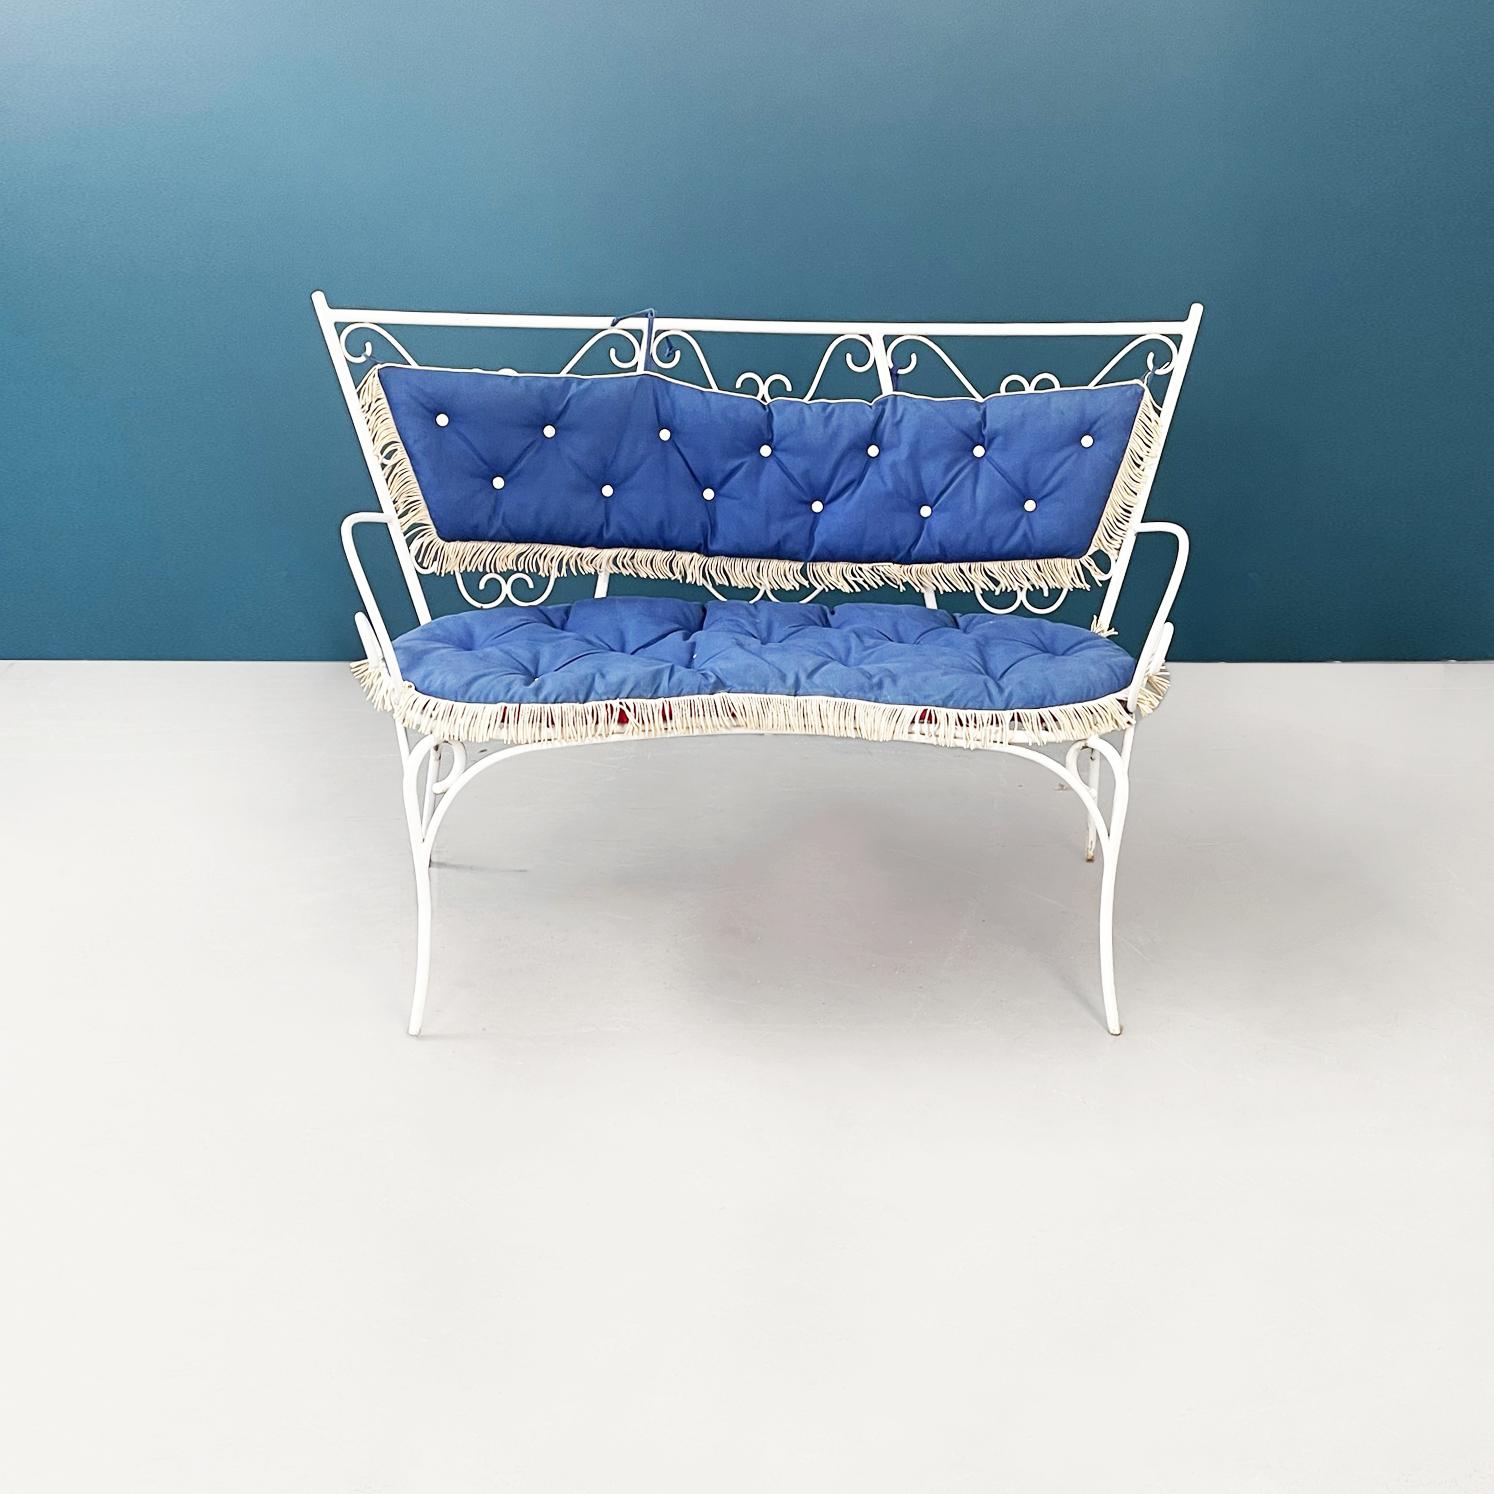 Italian mid-century Garden bench in white wrought iron and fabric, 1960s
Garden bench in white painted wrought iron. The seat, slightly curved and rounded, is made up of a series of springs on which is placed a padded cushion covered in bright pink